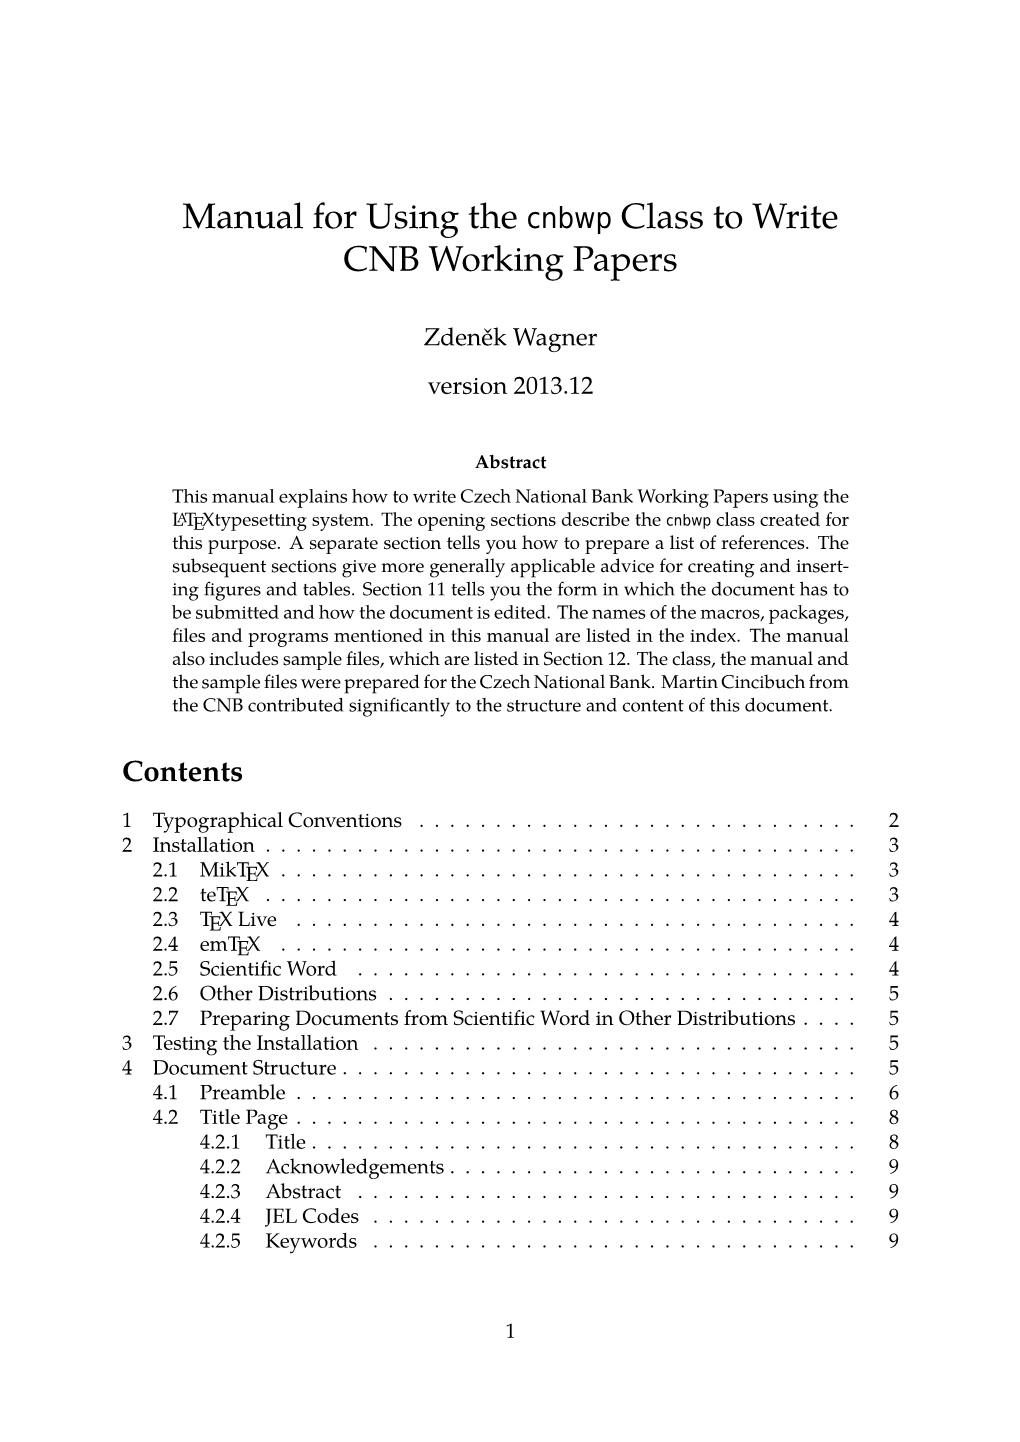 Manual for Using the Cnbwp Class to Write CNB Working Papers